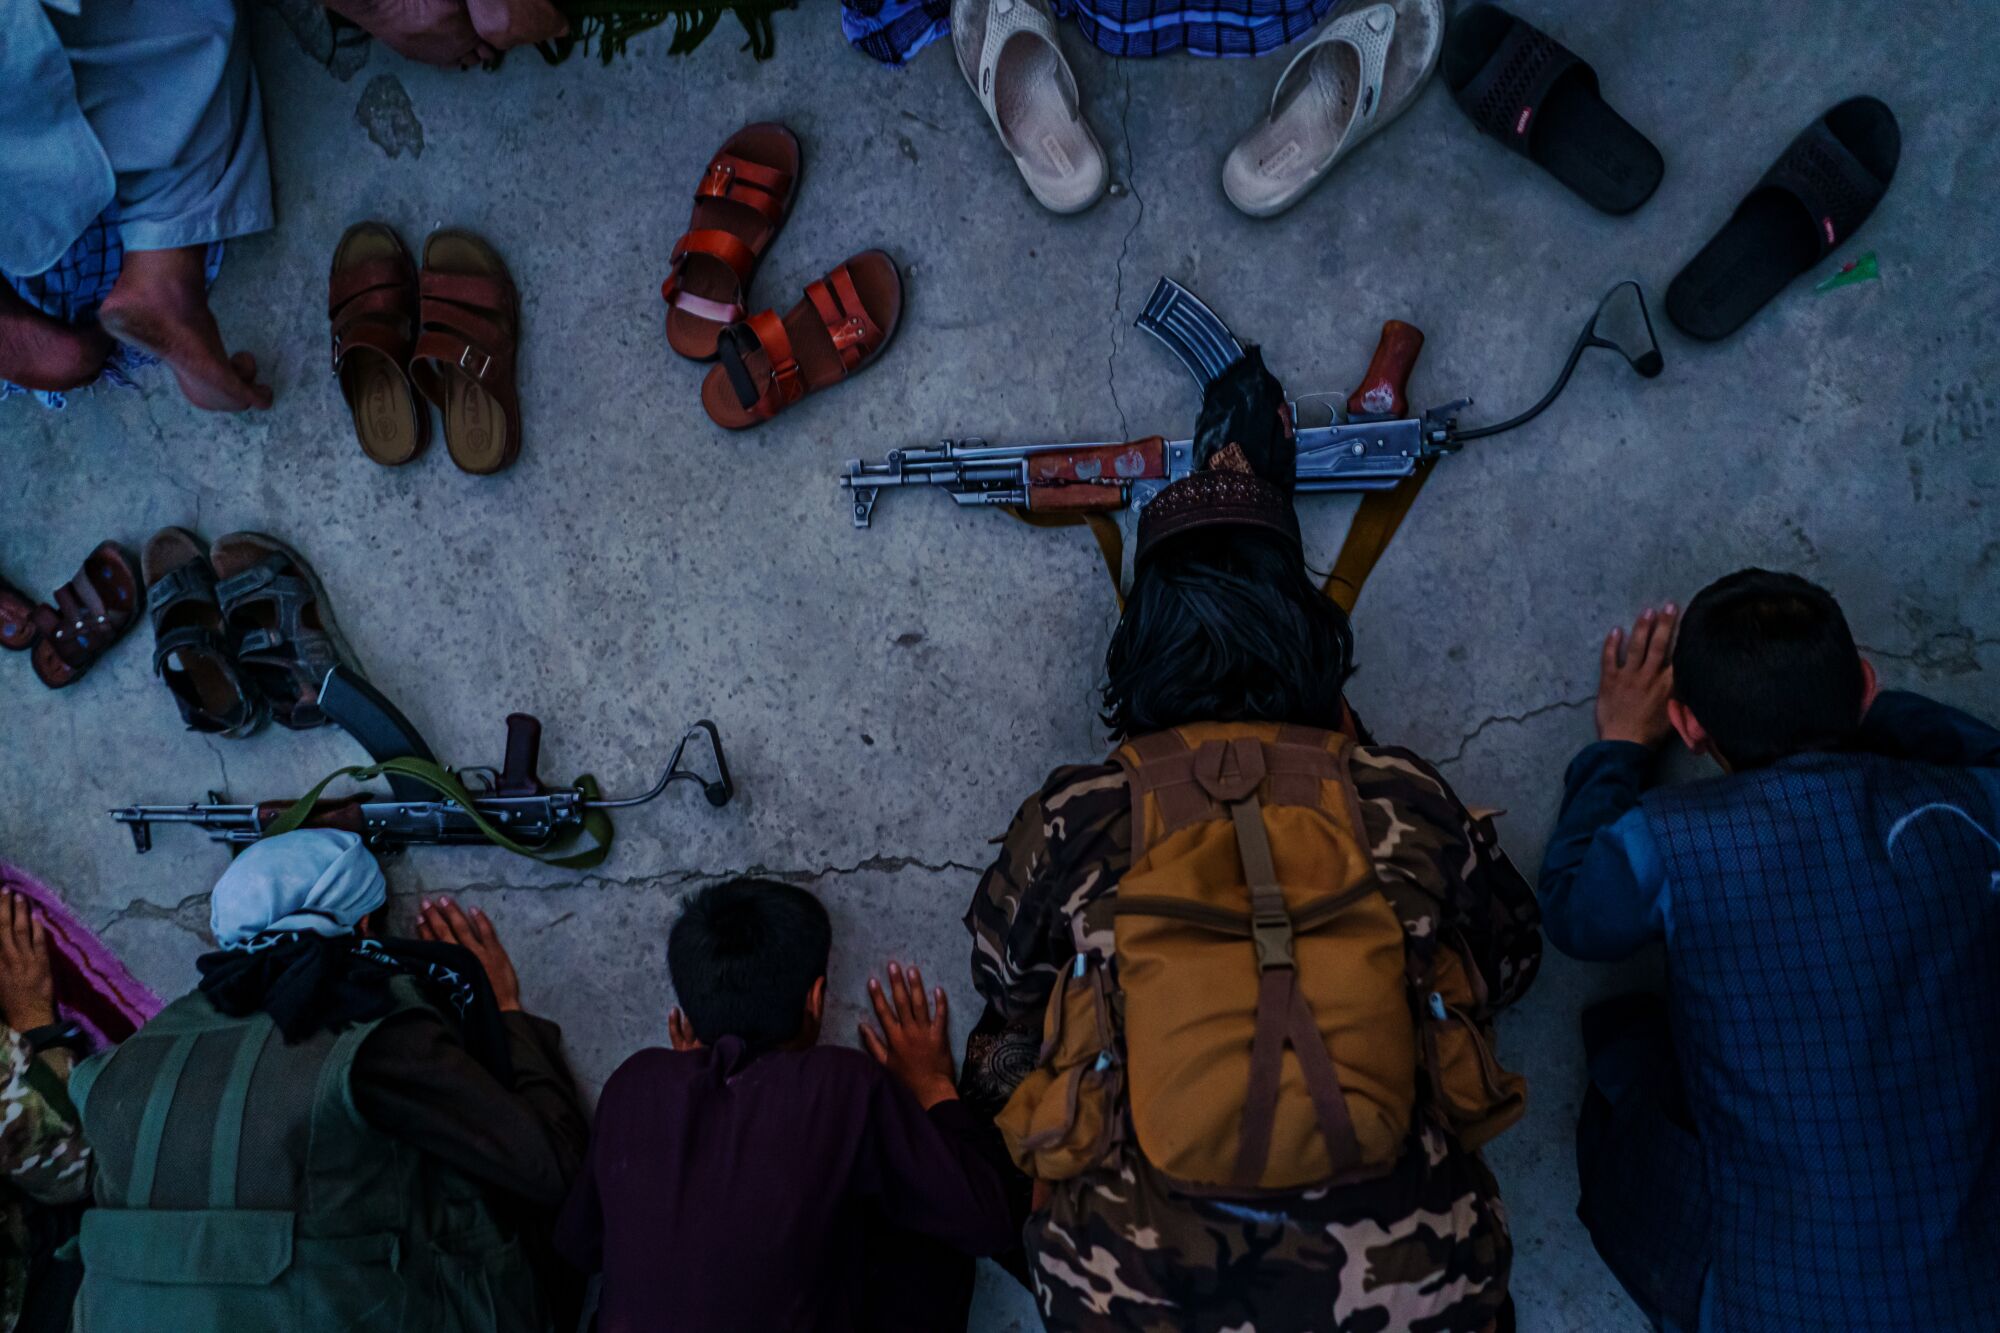 Seen from above, men kneel on the ground, shoes and weapons in front of them.